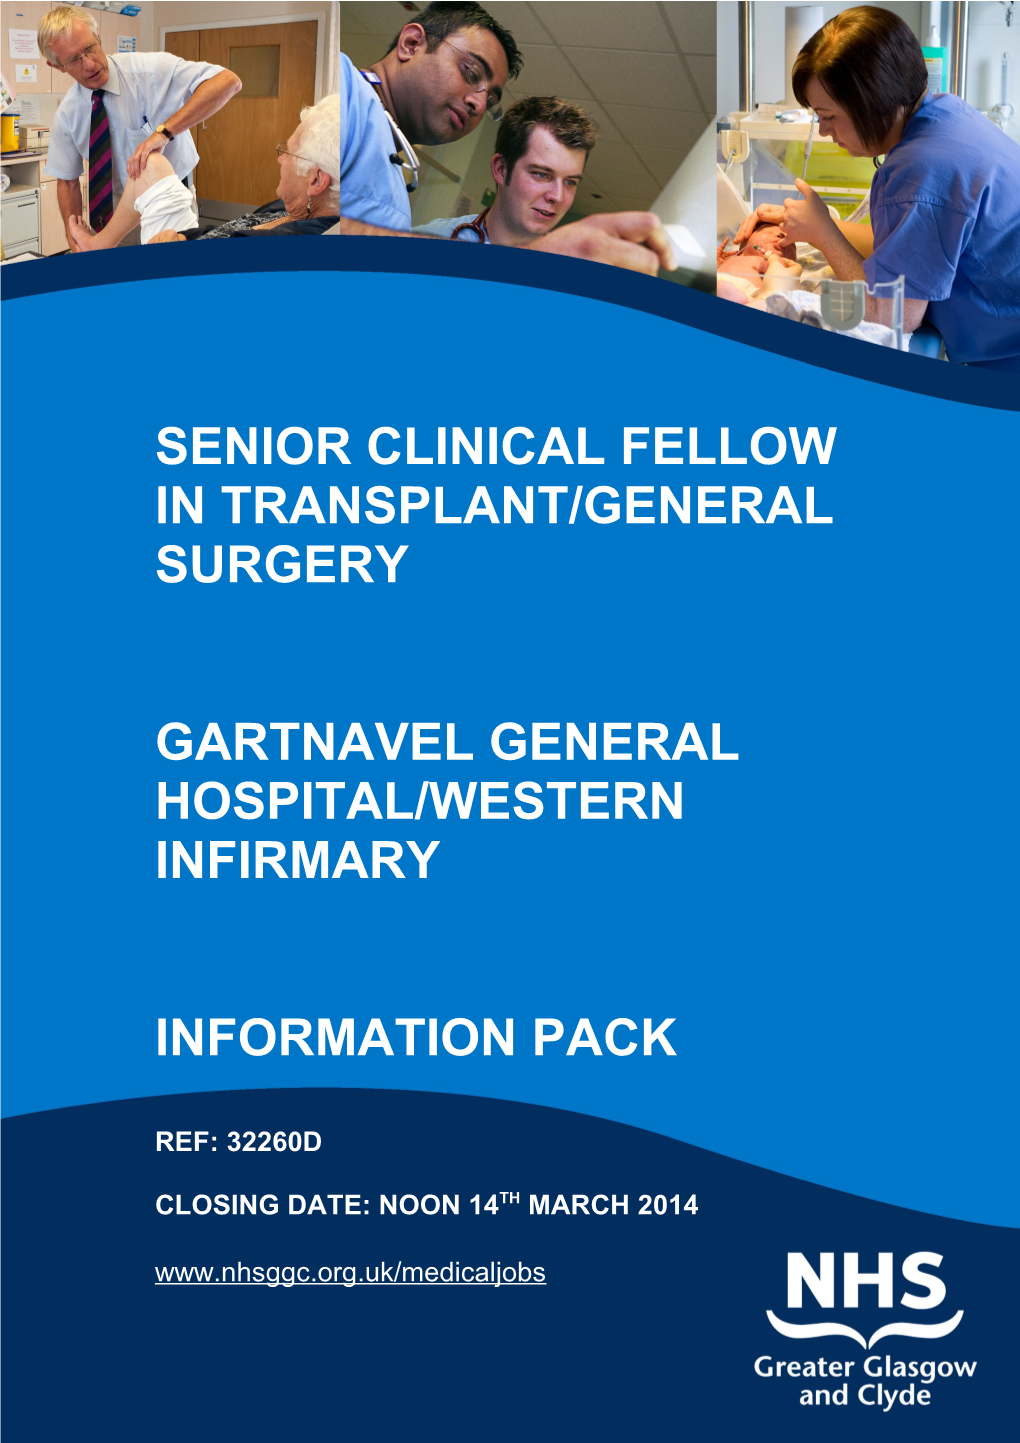 Senior Clinical Fellow in Transplant/General Surgery